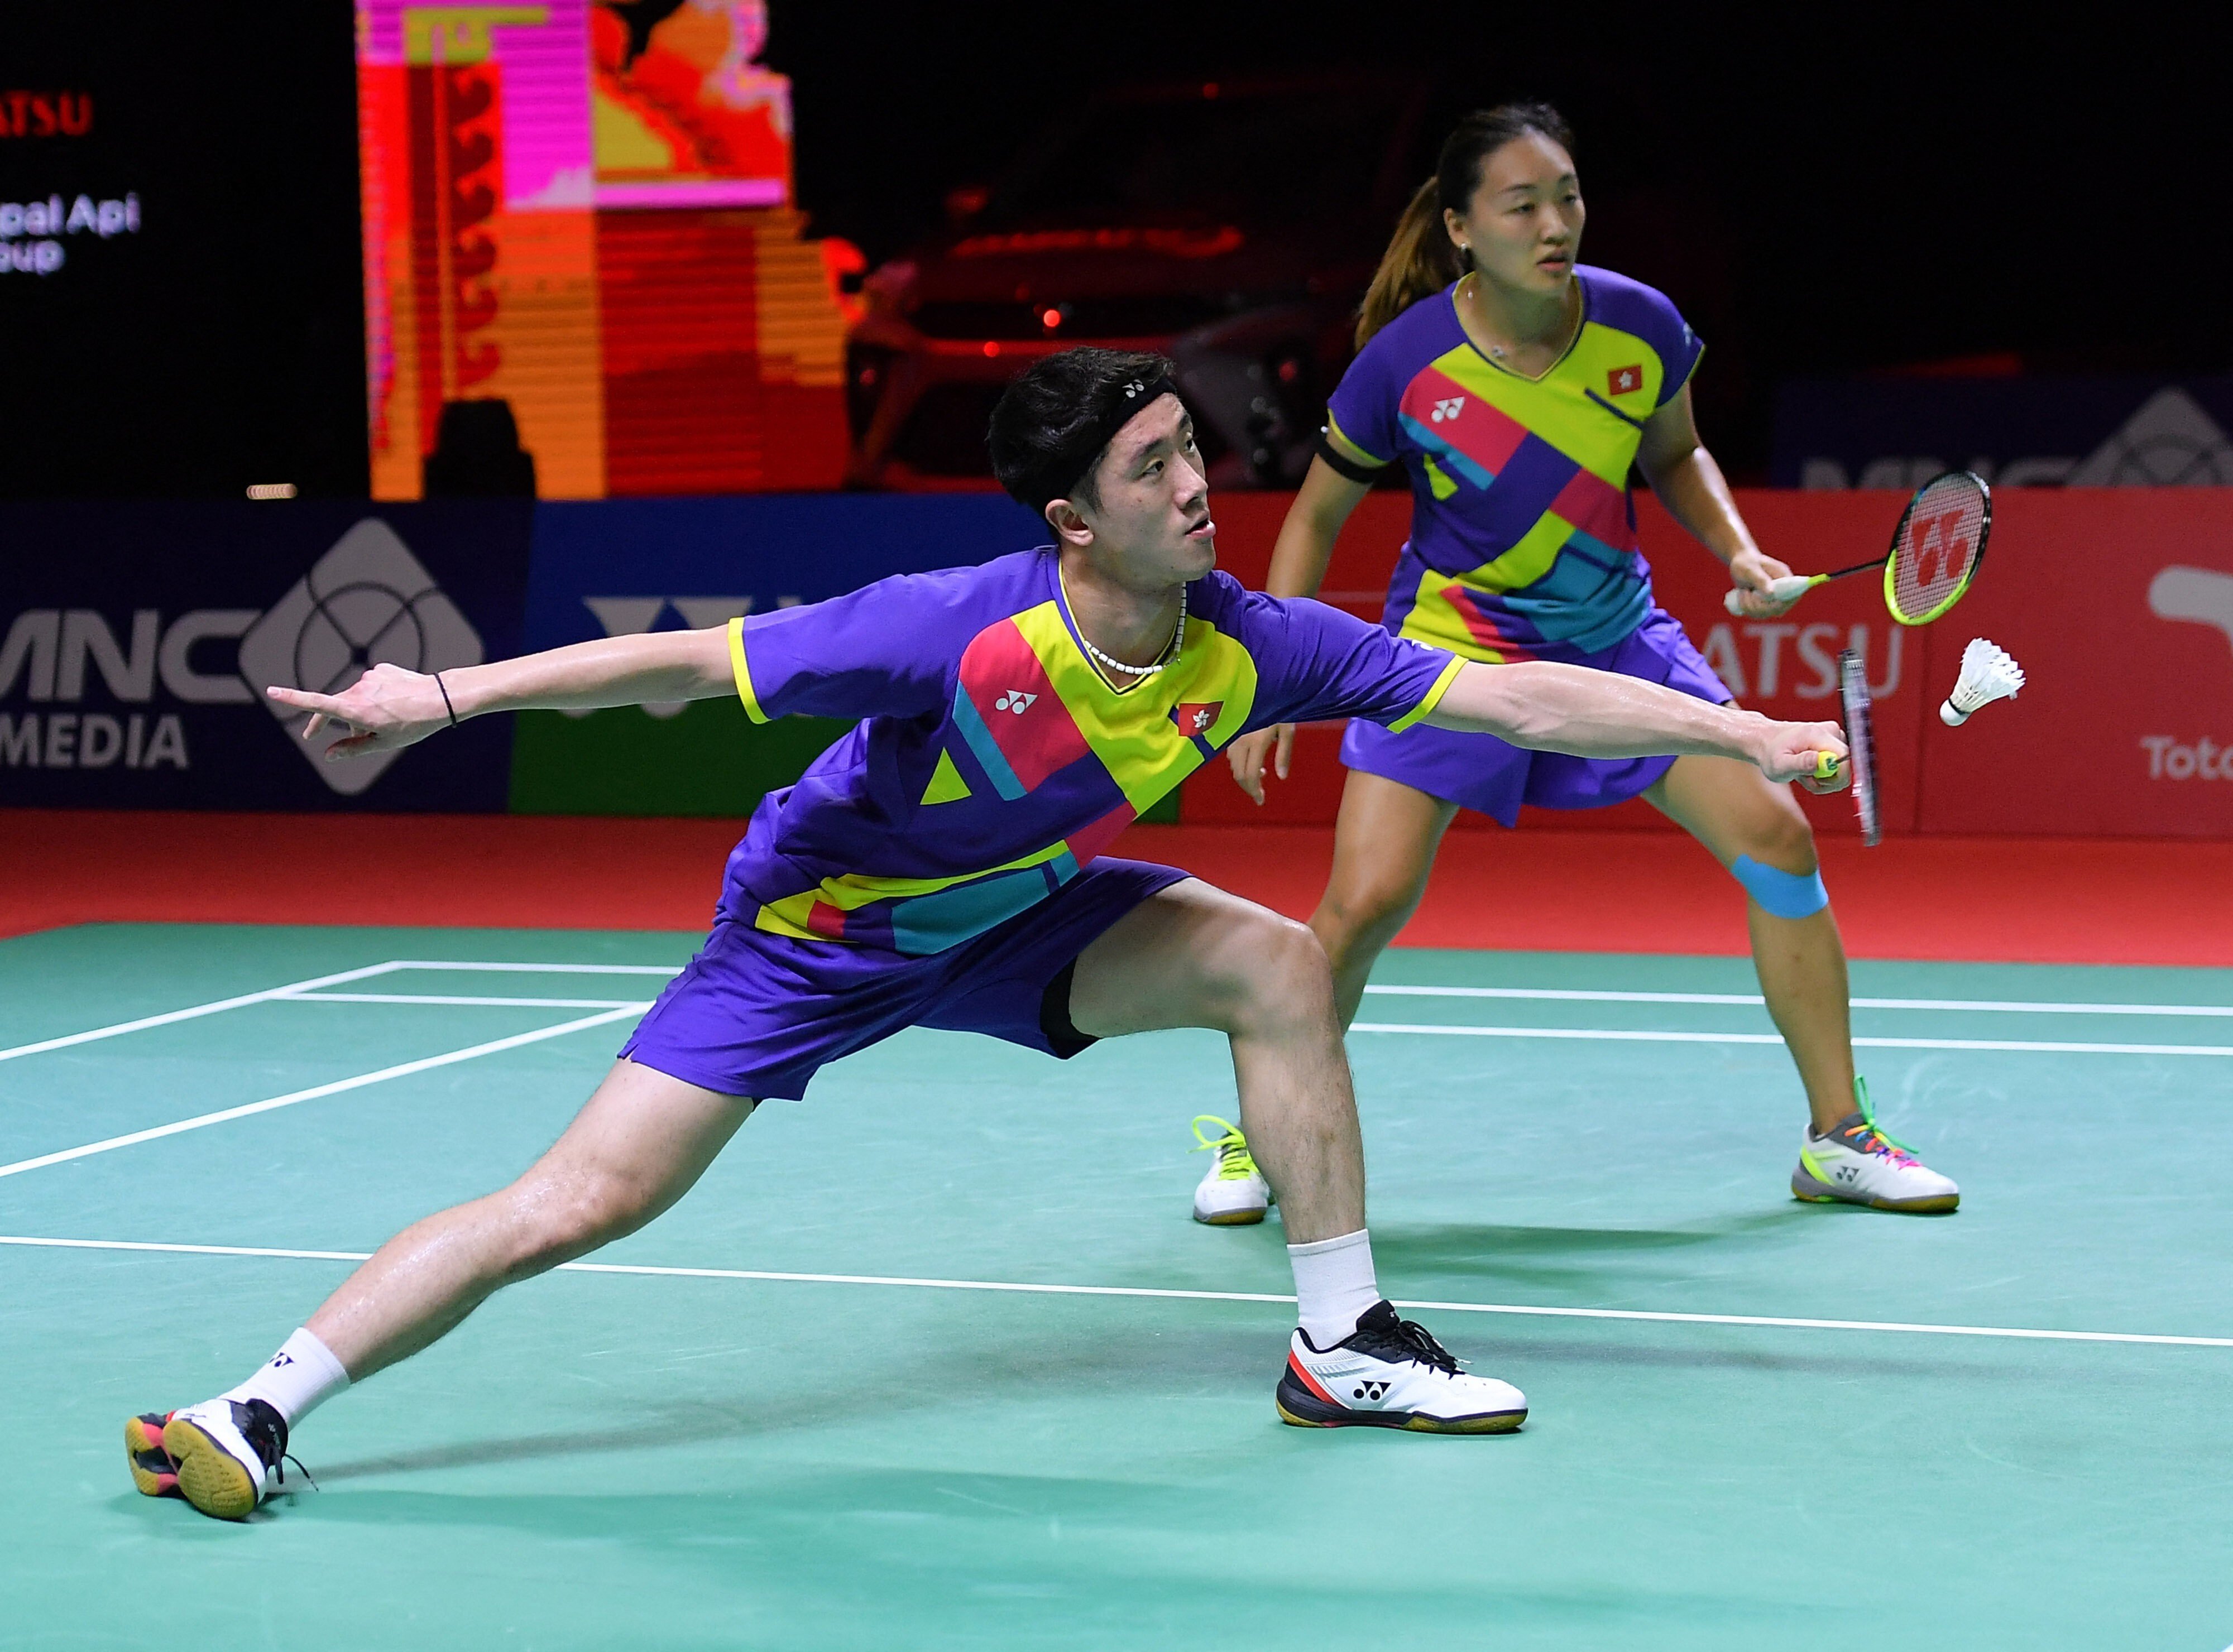 Indonesian Open in-form Hong Kong pair Tang Chun-man and Tse Ying-suet continue quest for World Tour finals spot South China Morning Post